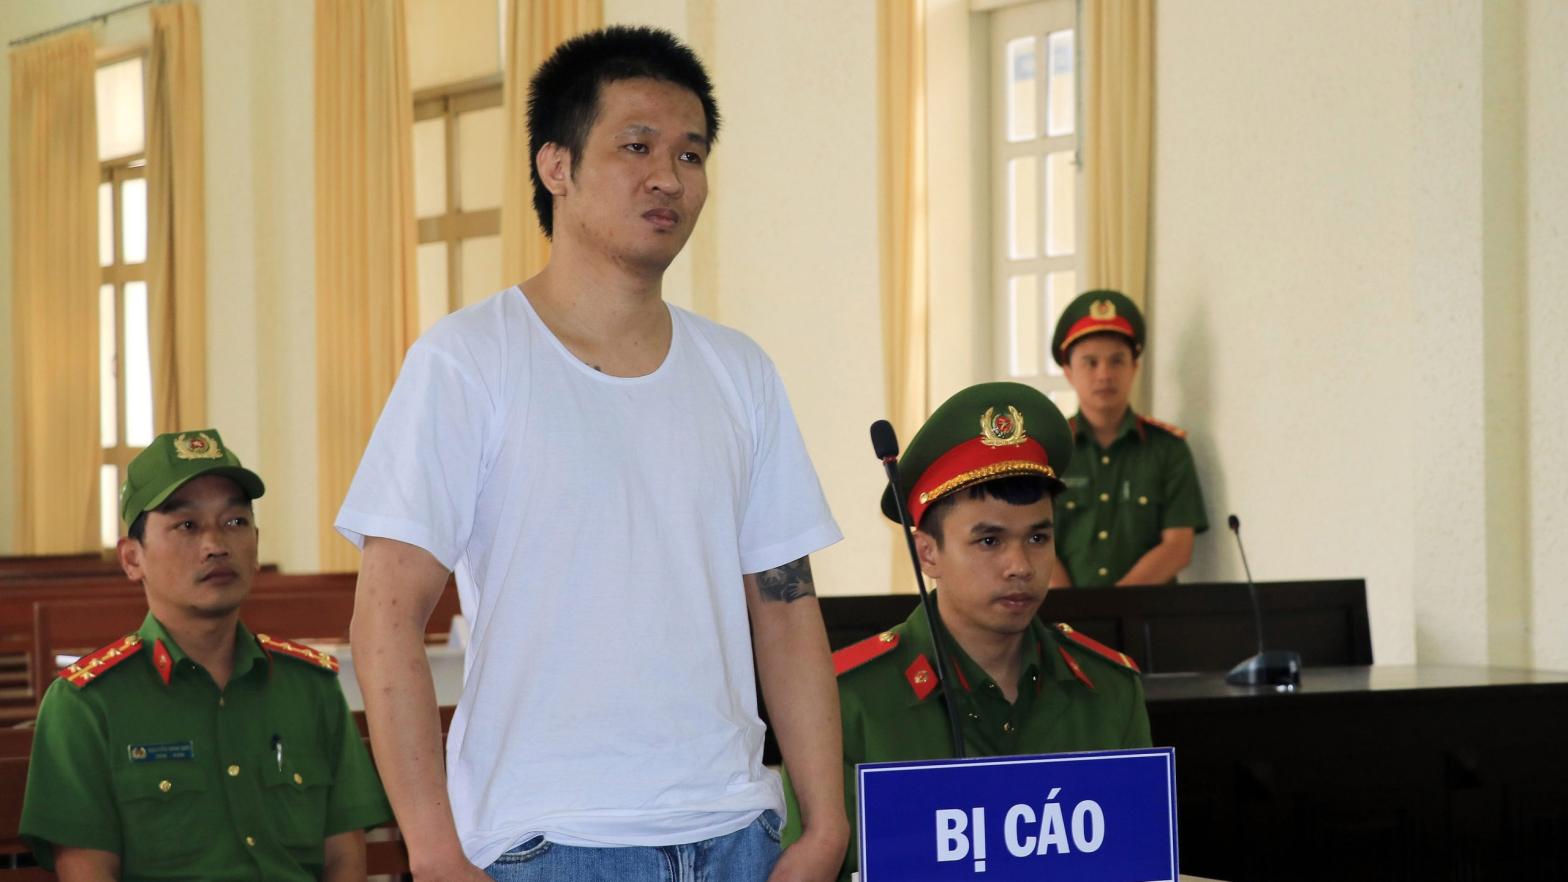 Nguyen Quoc Duc Vuong sentenced in July 2020 to eight years in prison over pro-democracy and anti-government Facebook posts in Vietnam. (Photo: Vietnam News Agency/AFP, Getty Images)